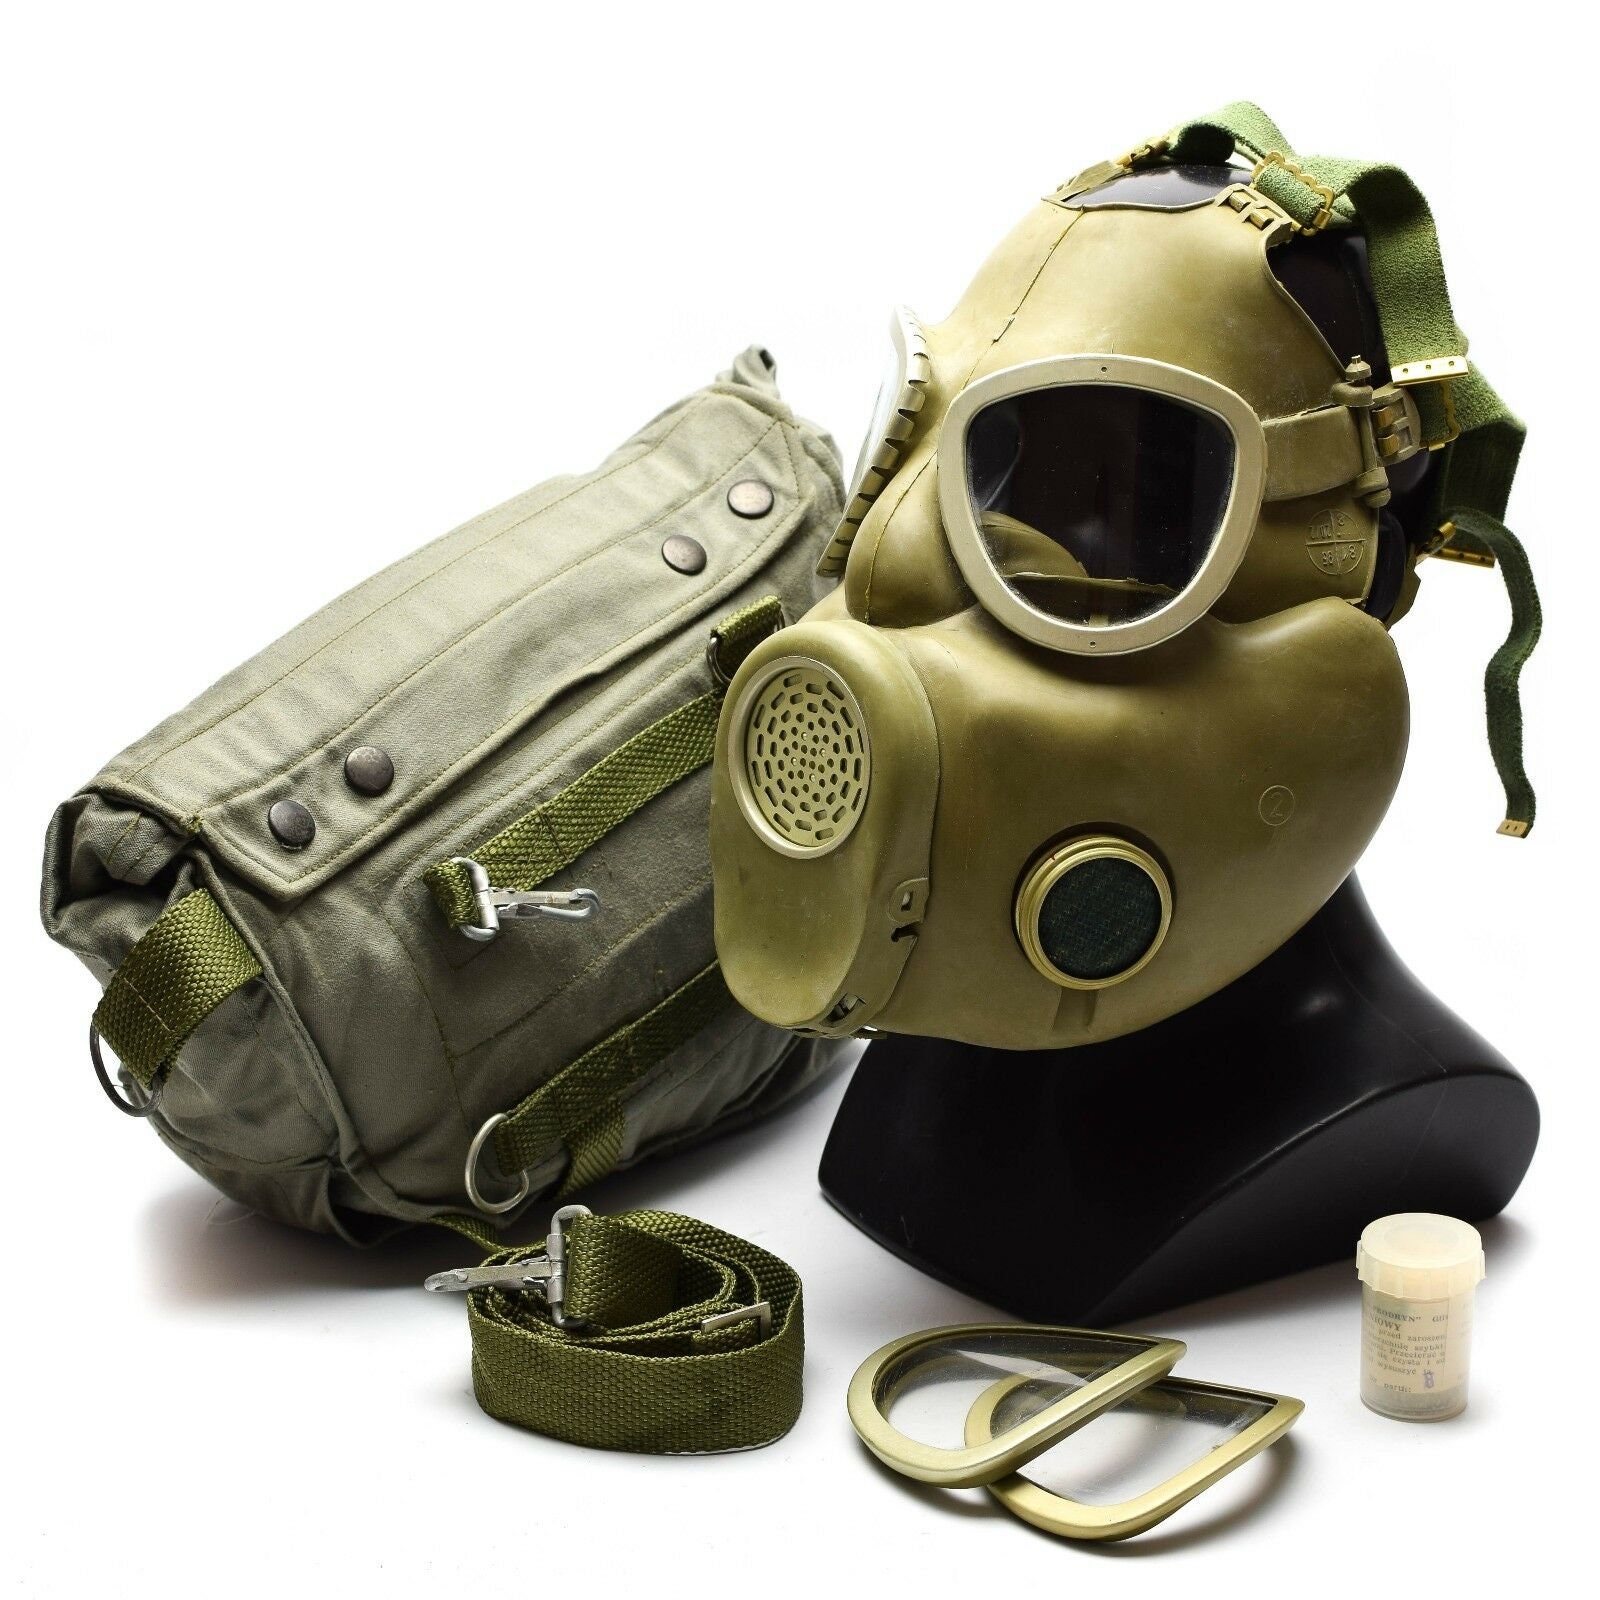 File:Gas Mask Display at Souvenir Stand - Westerplatte - Gdansk - Poland  (28088316575).jpg - Wikimedia Commons